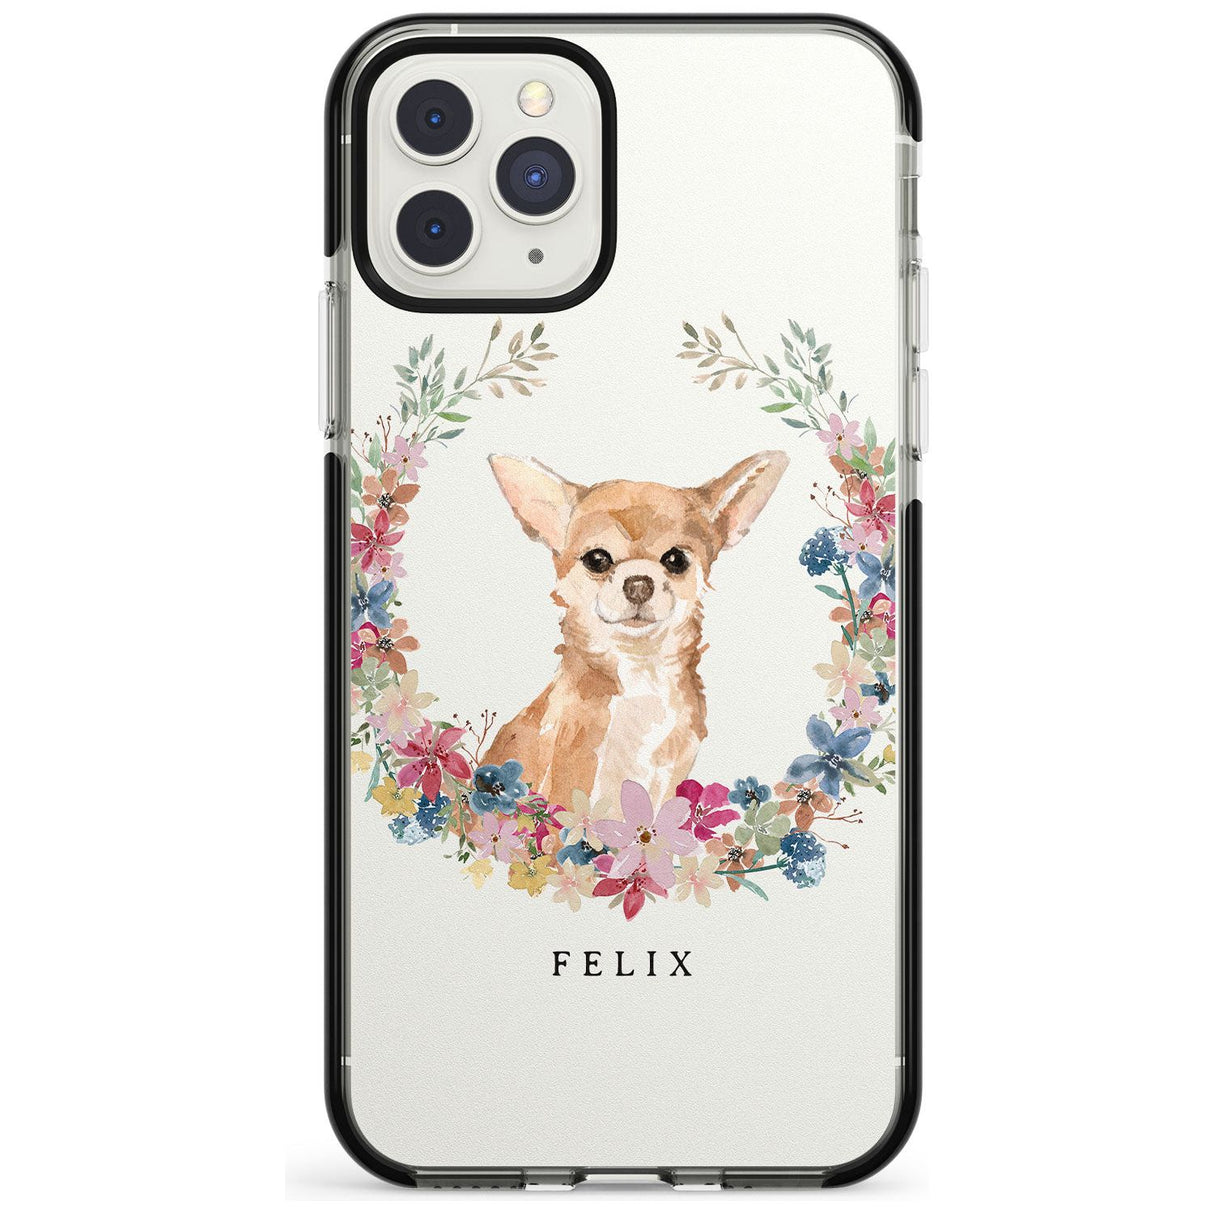 Chihuahua - Watercolour Dog Portrait Black Impact Phone Case for iPhone 11 Pro Max